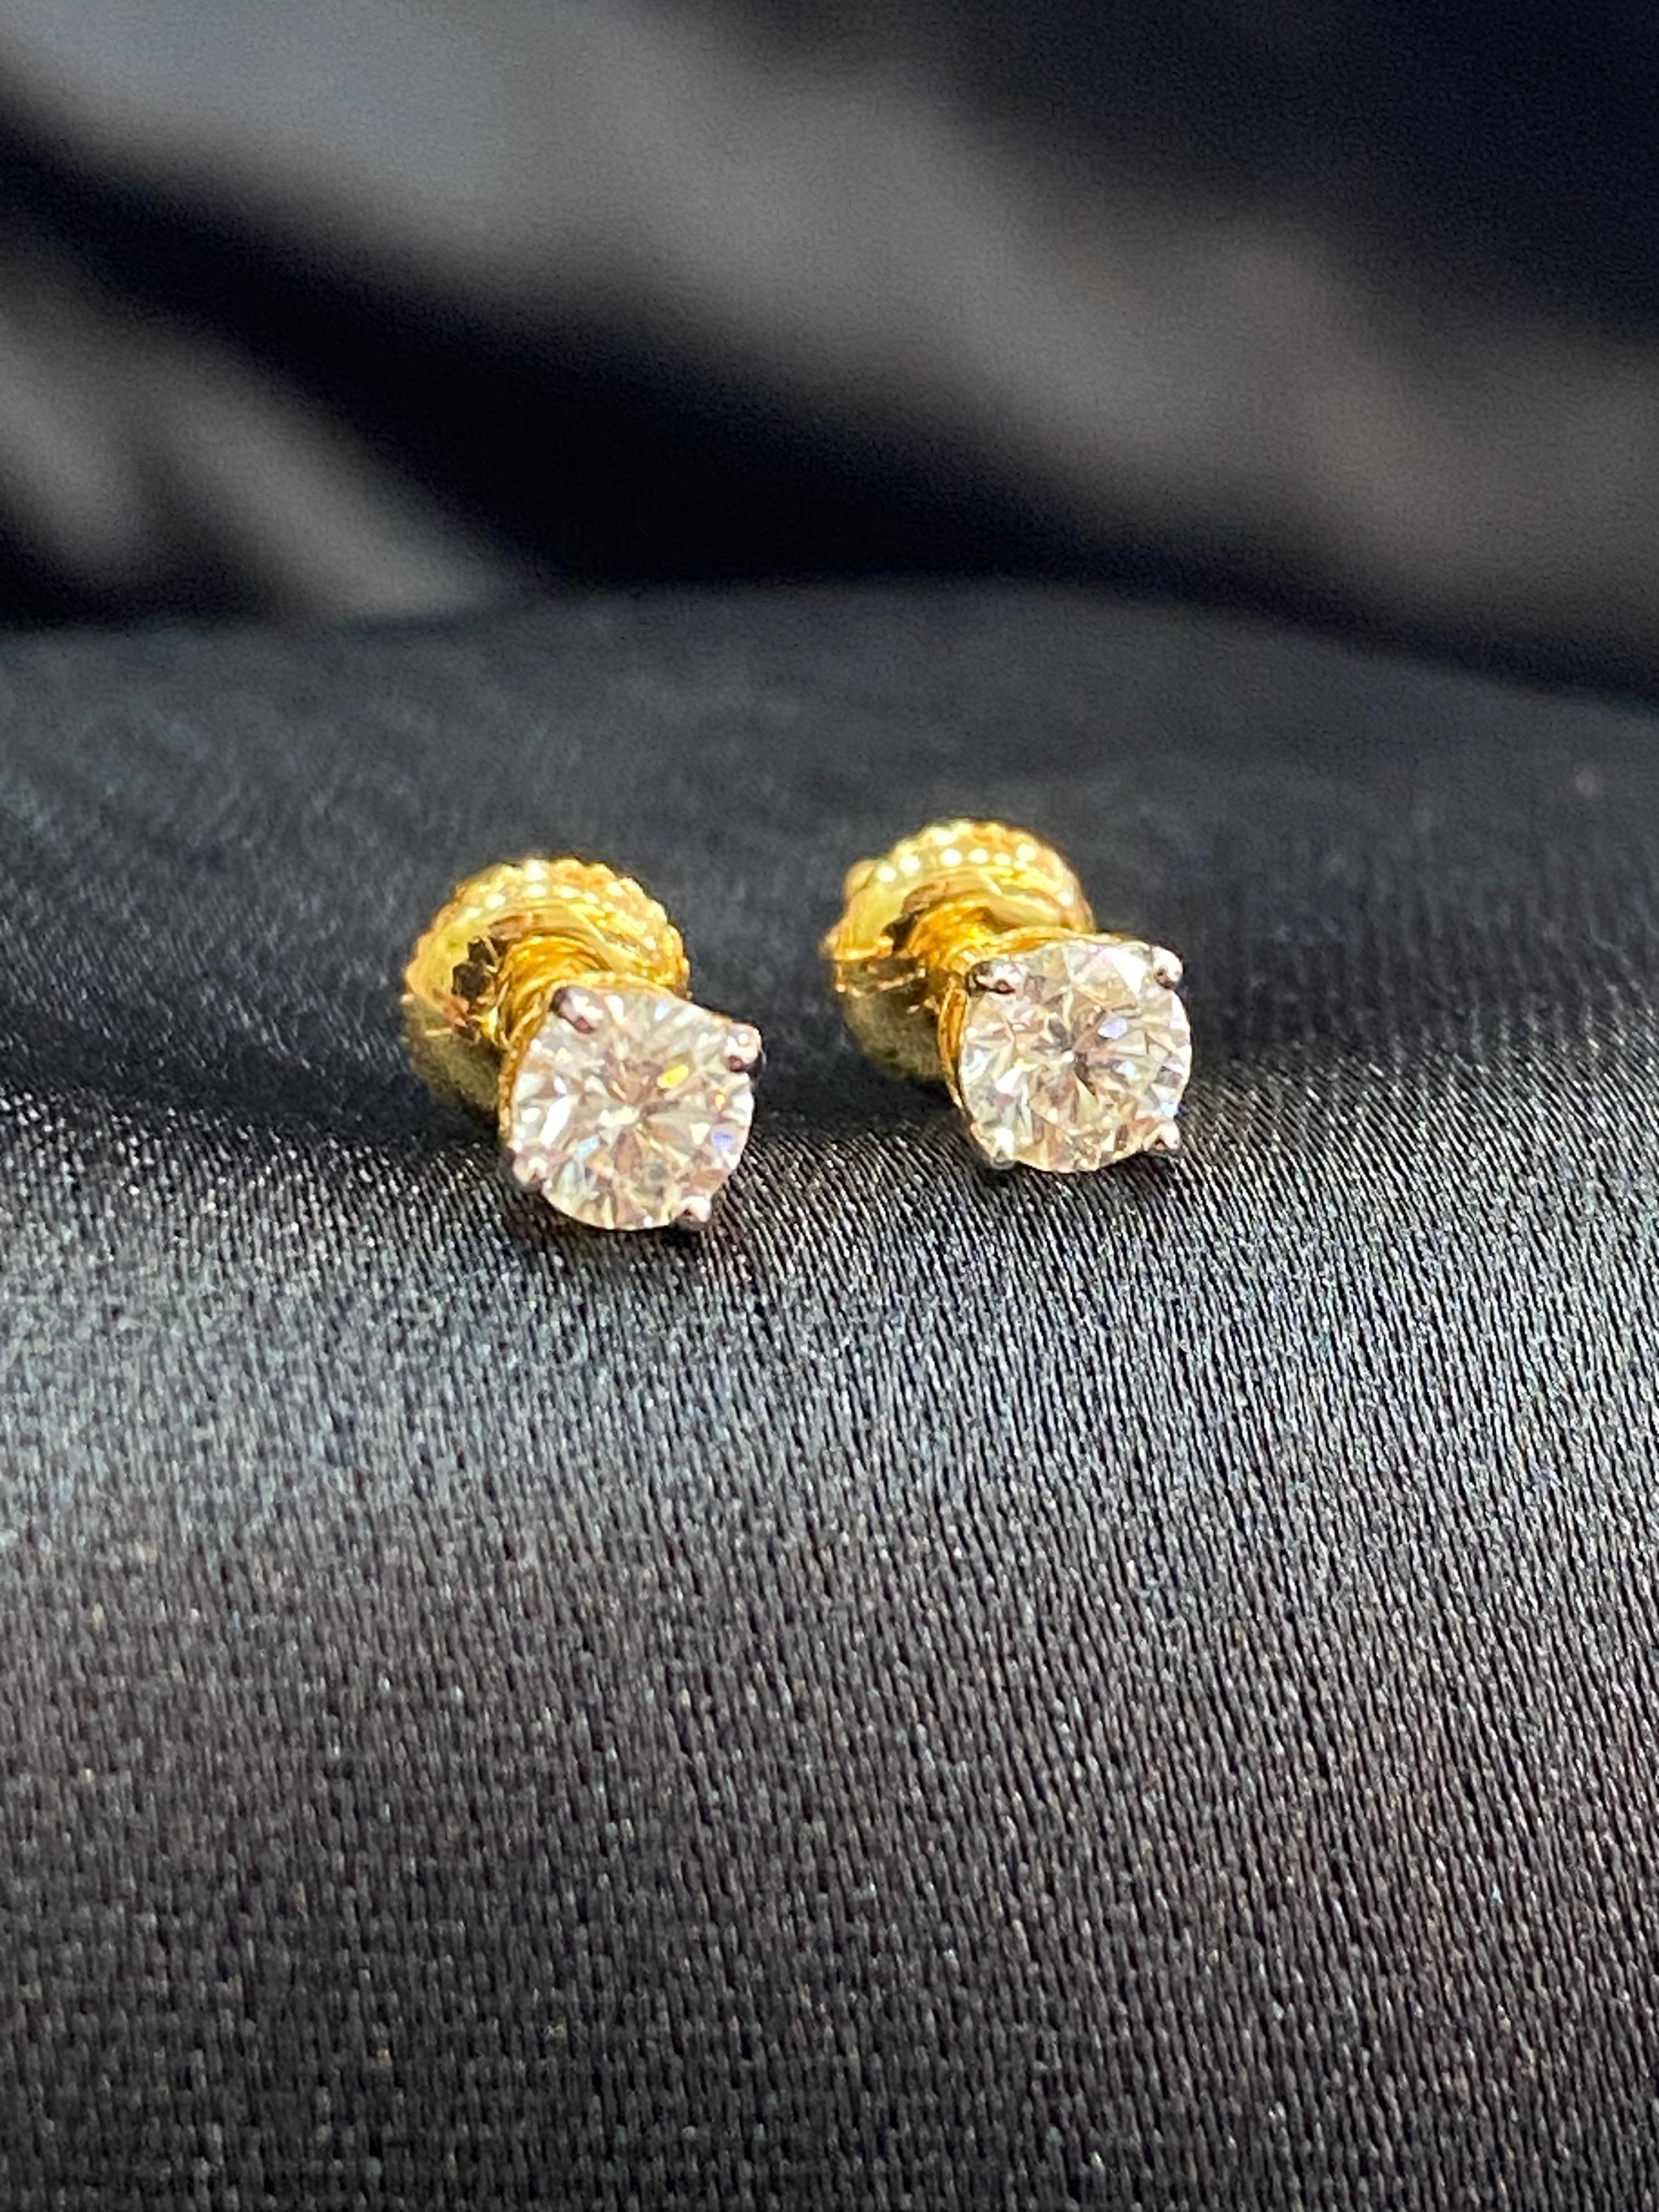 Unlock the allure of these exclusive GIA certified diamond solitaire earrings, boasting a total of 1 carat (0.50 carats each). Crafted from radiant diamonds and gleaming gold, they epitomize luxury and elegance. Make them yours and indulge in the